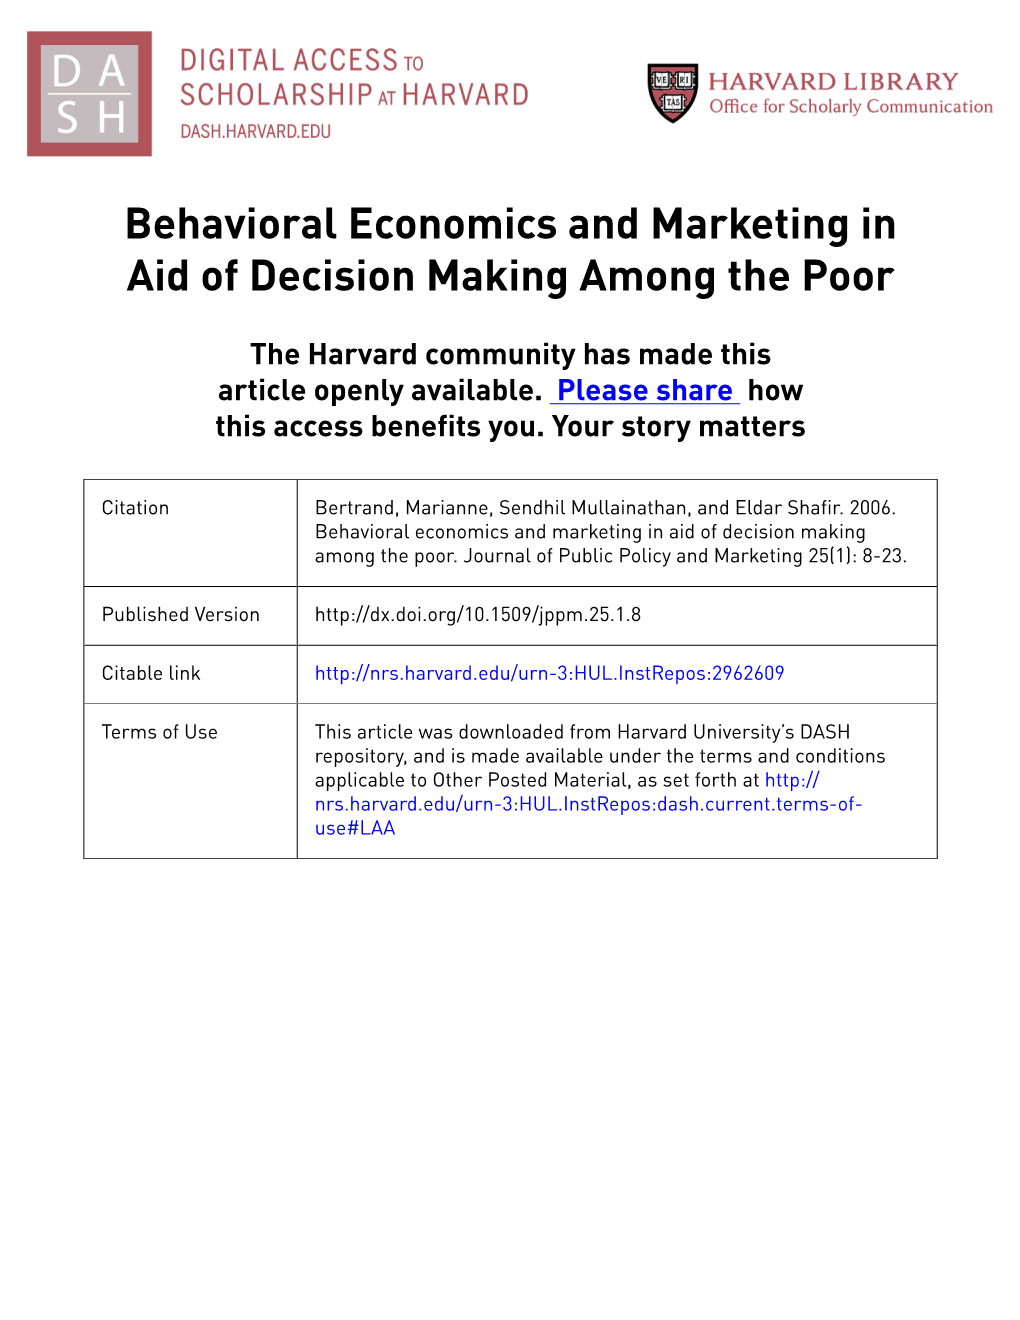 Behavioral Economics and Marketing in Aid of Decision Making Among the Poor